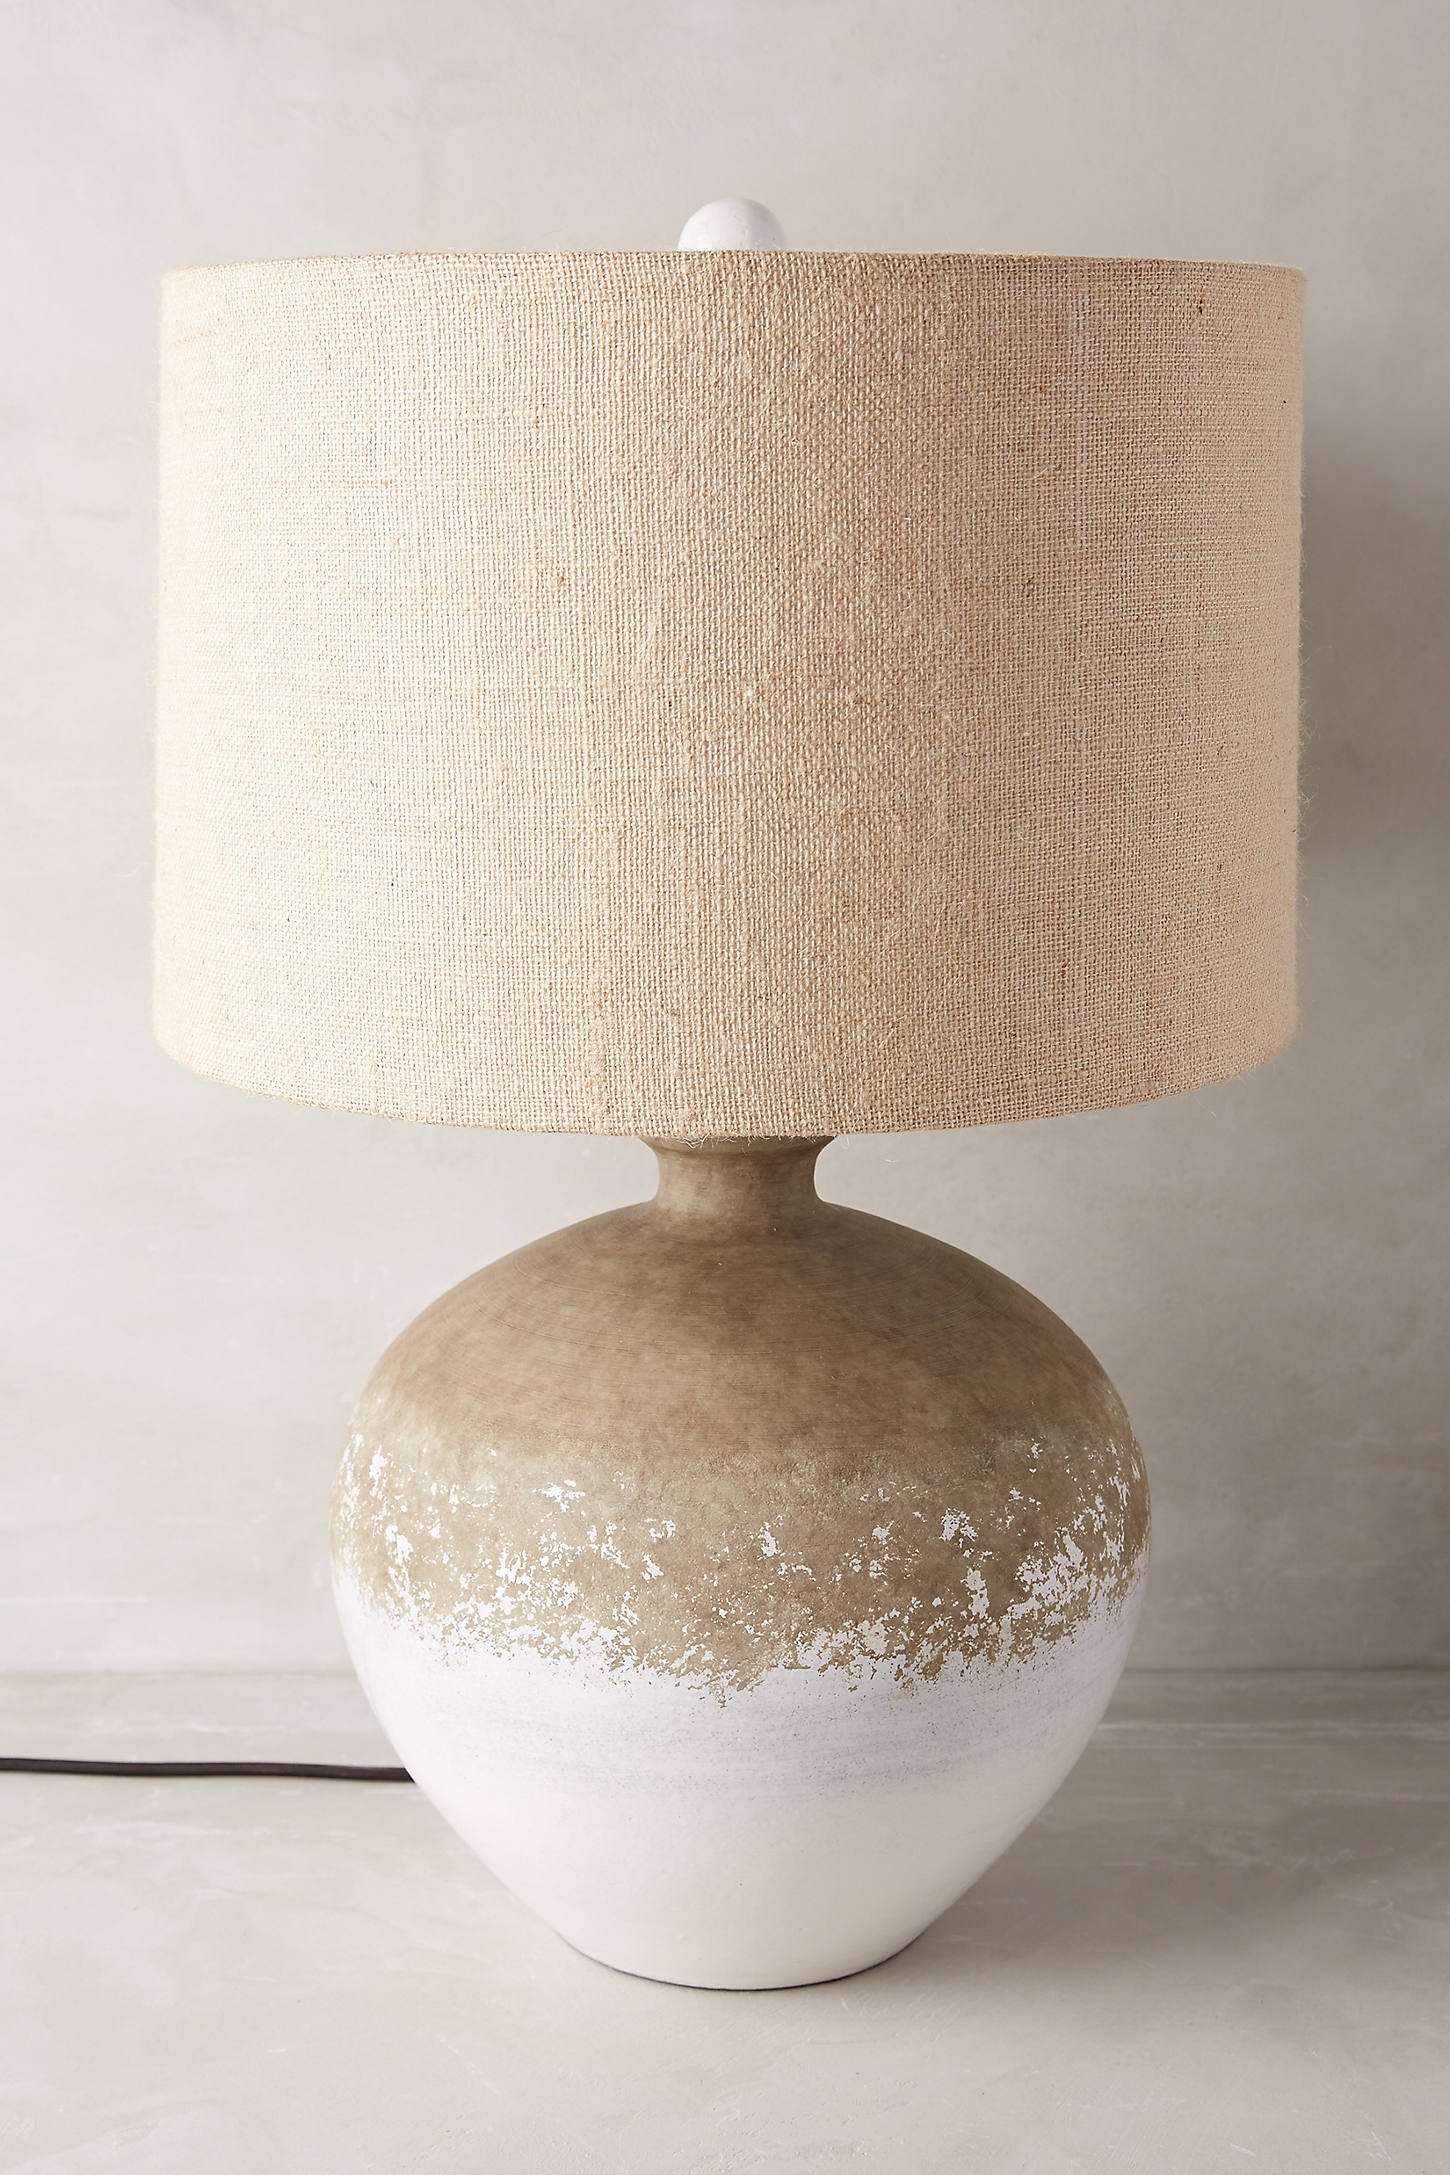 Aliso Table Lamp By Anthropologie in Beige - Image 0